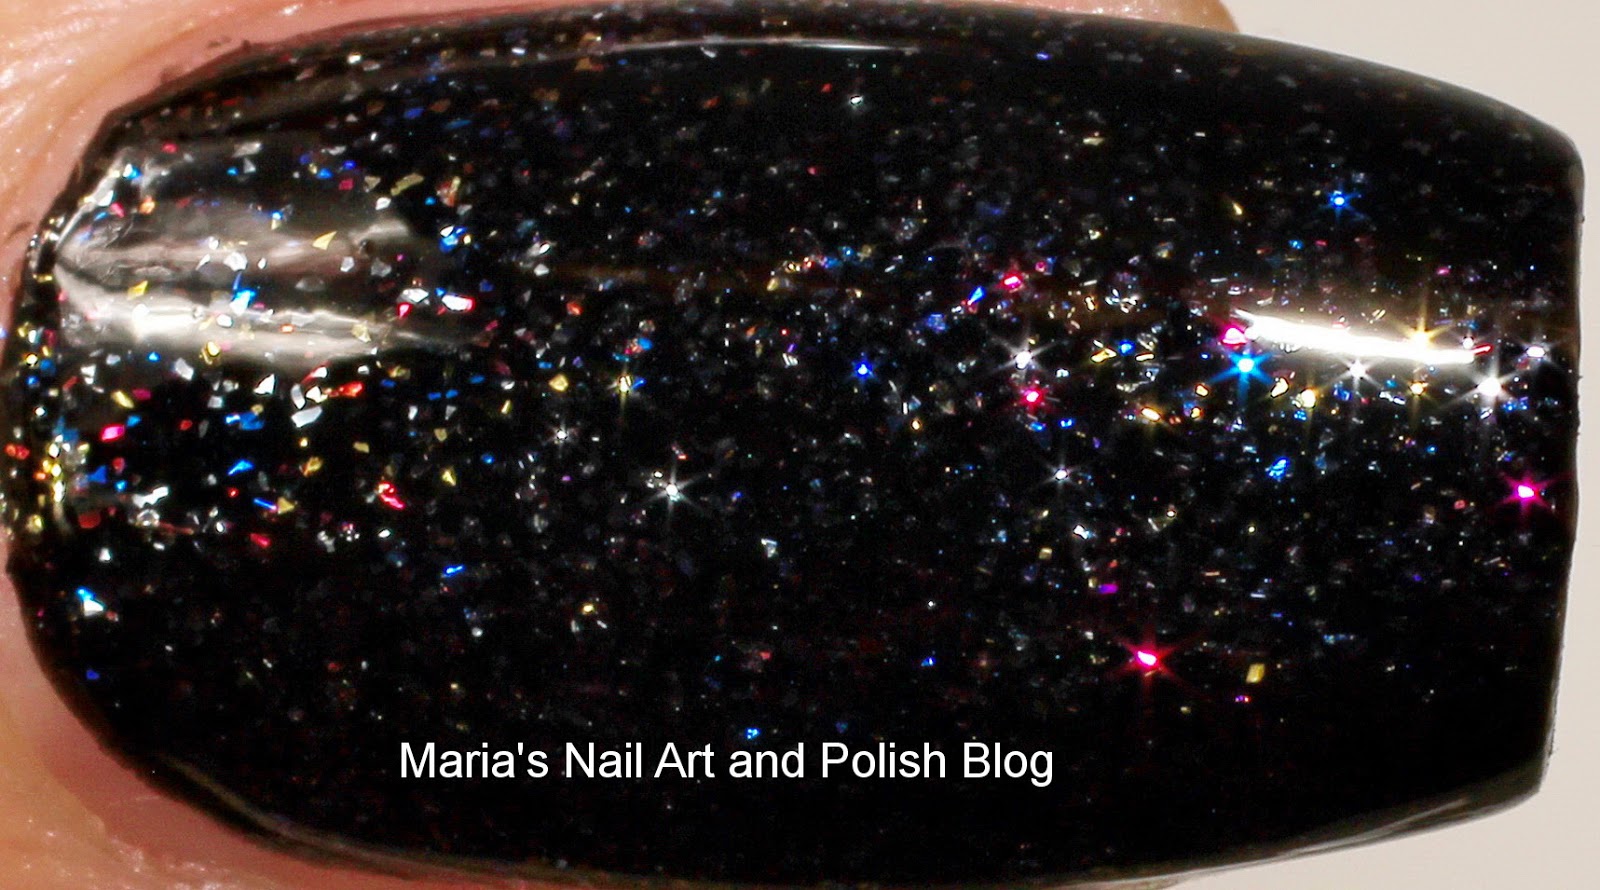 Marias Nail Art and Polish Blog: Chanel Lune D’Argent 397 and Rose